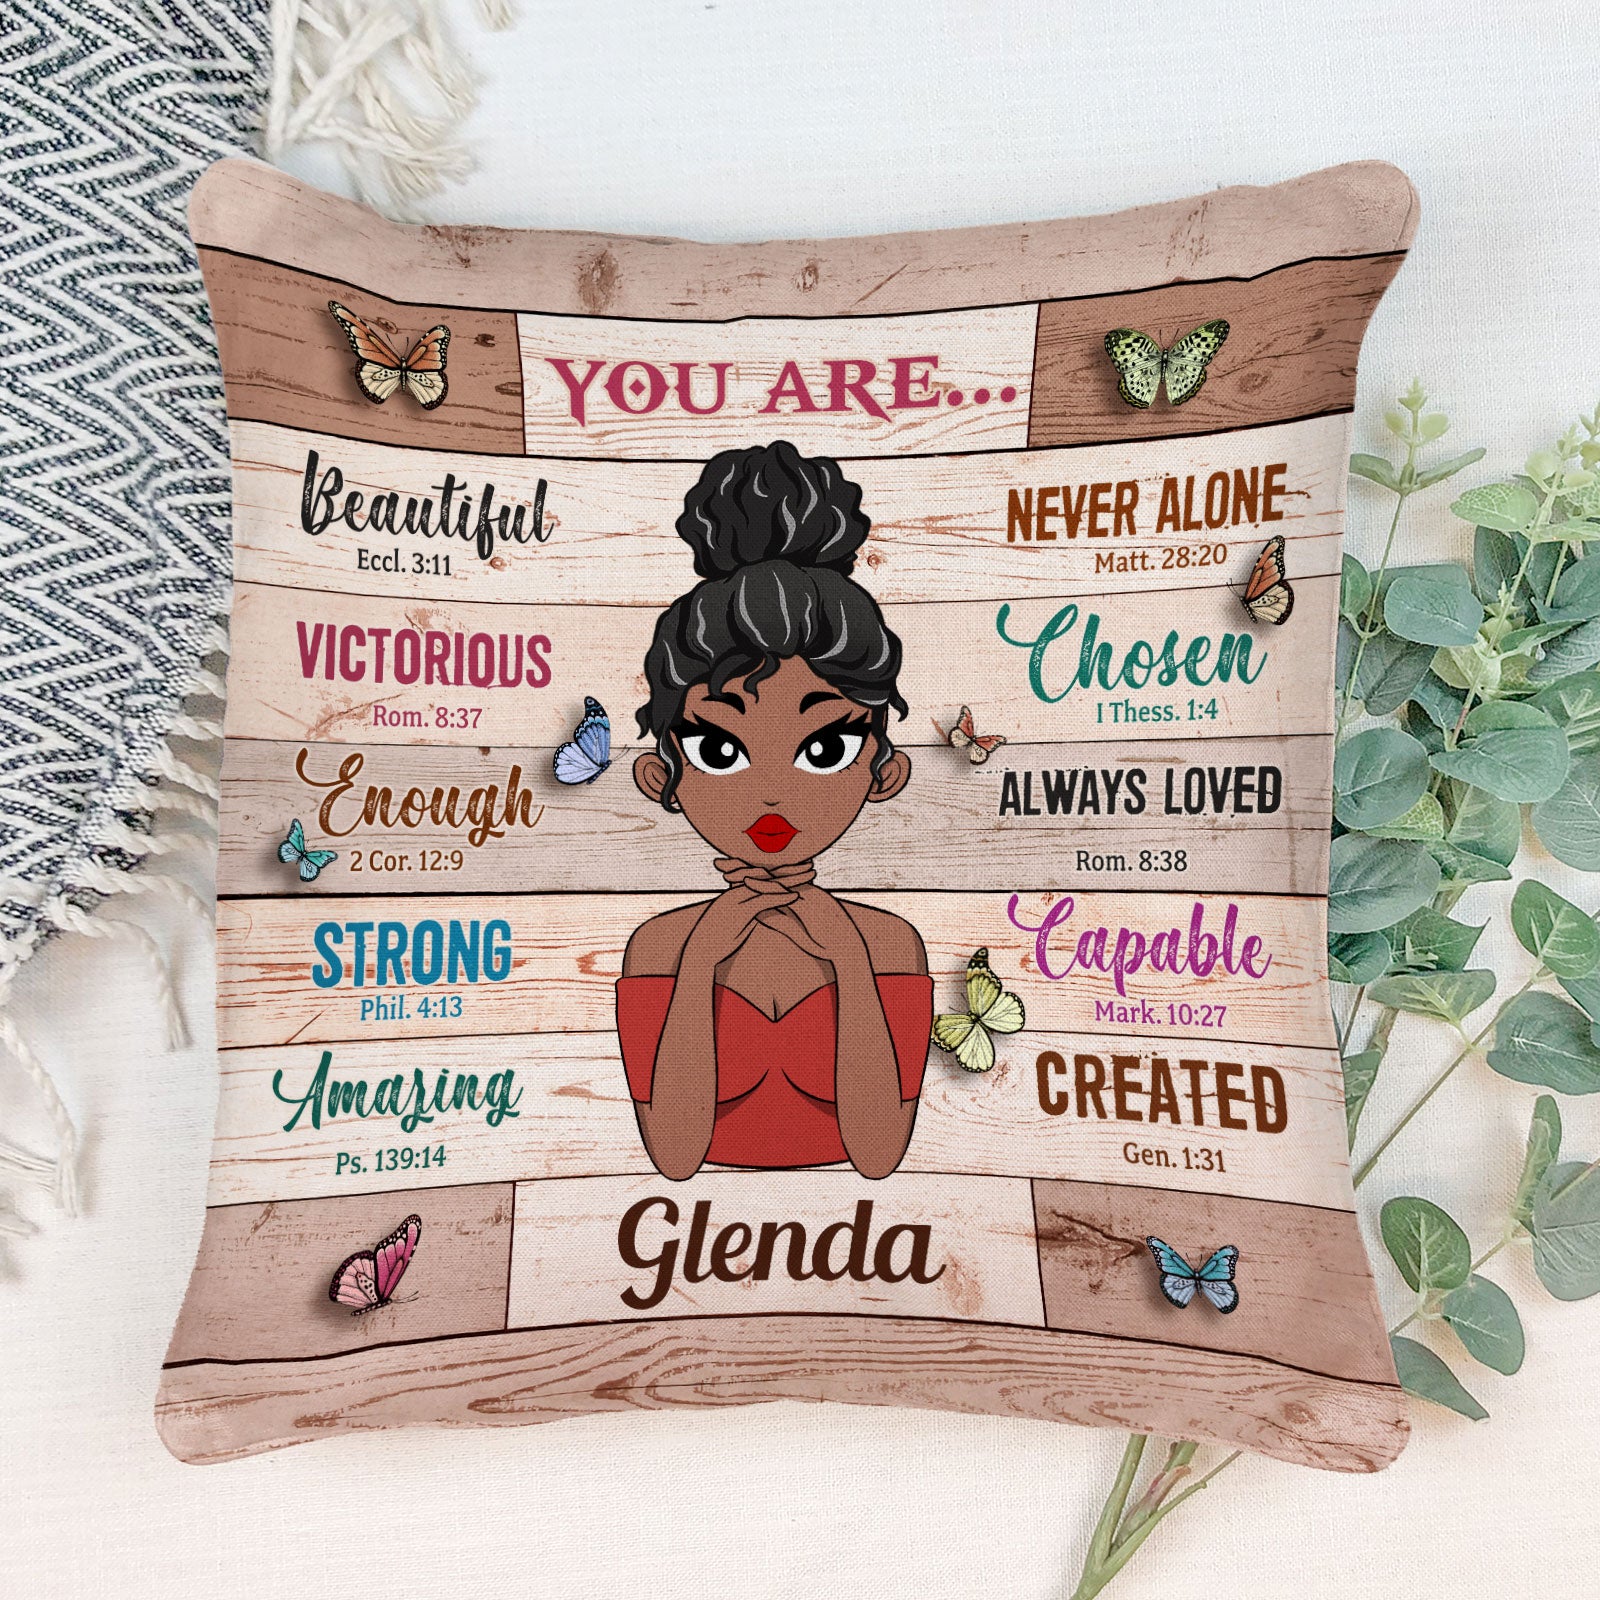 You Are Amazing - Personalized Pillow - Birthday Gift For Girl, Black Girl, Black Woman, Christian